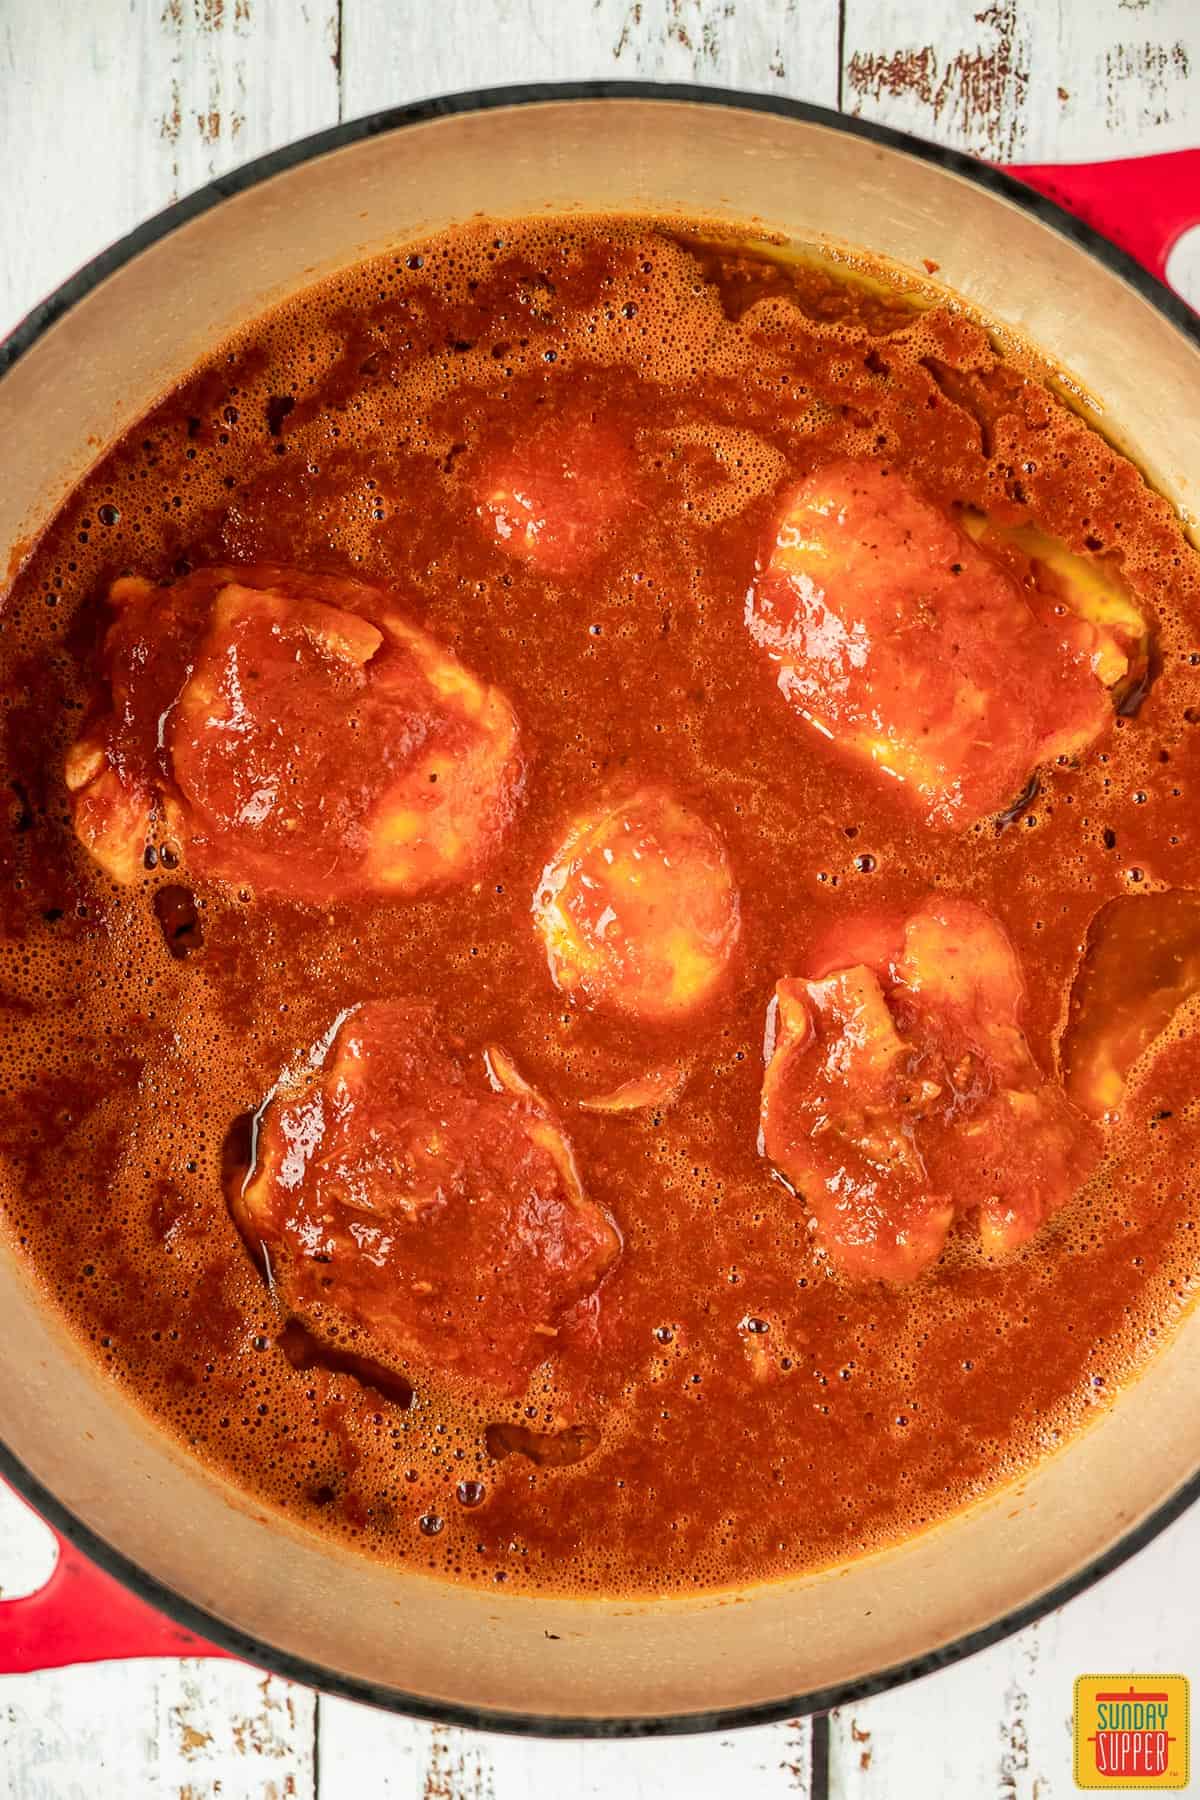 Chicken birria cooking in the pot